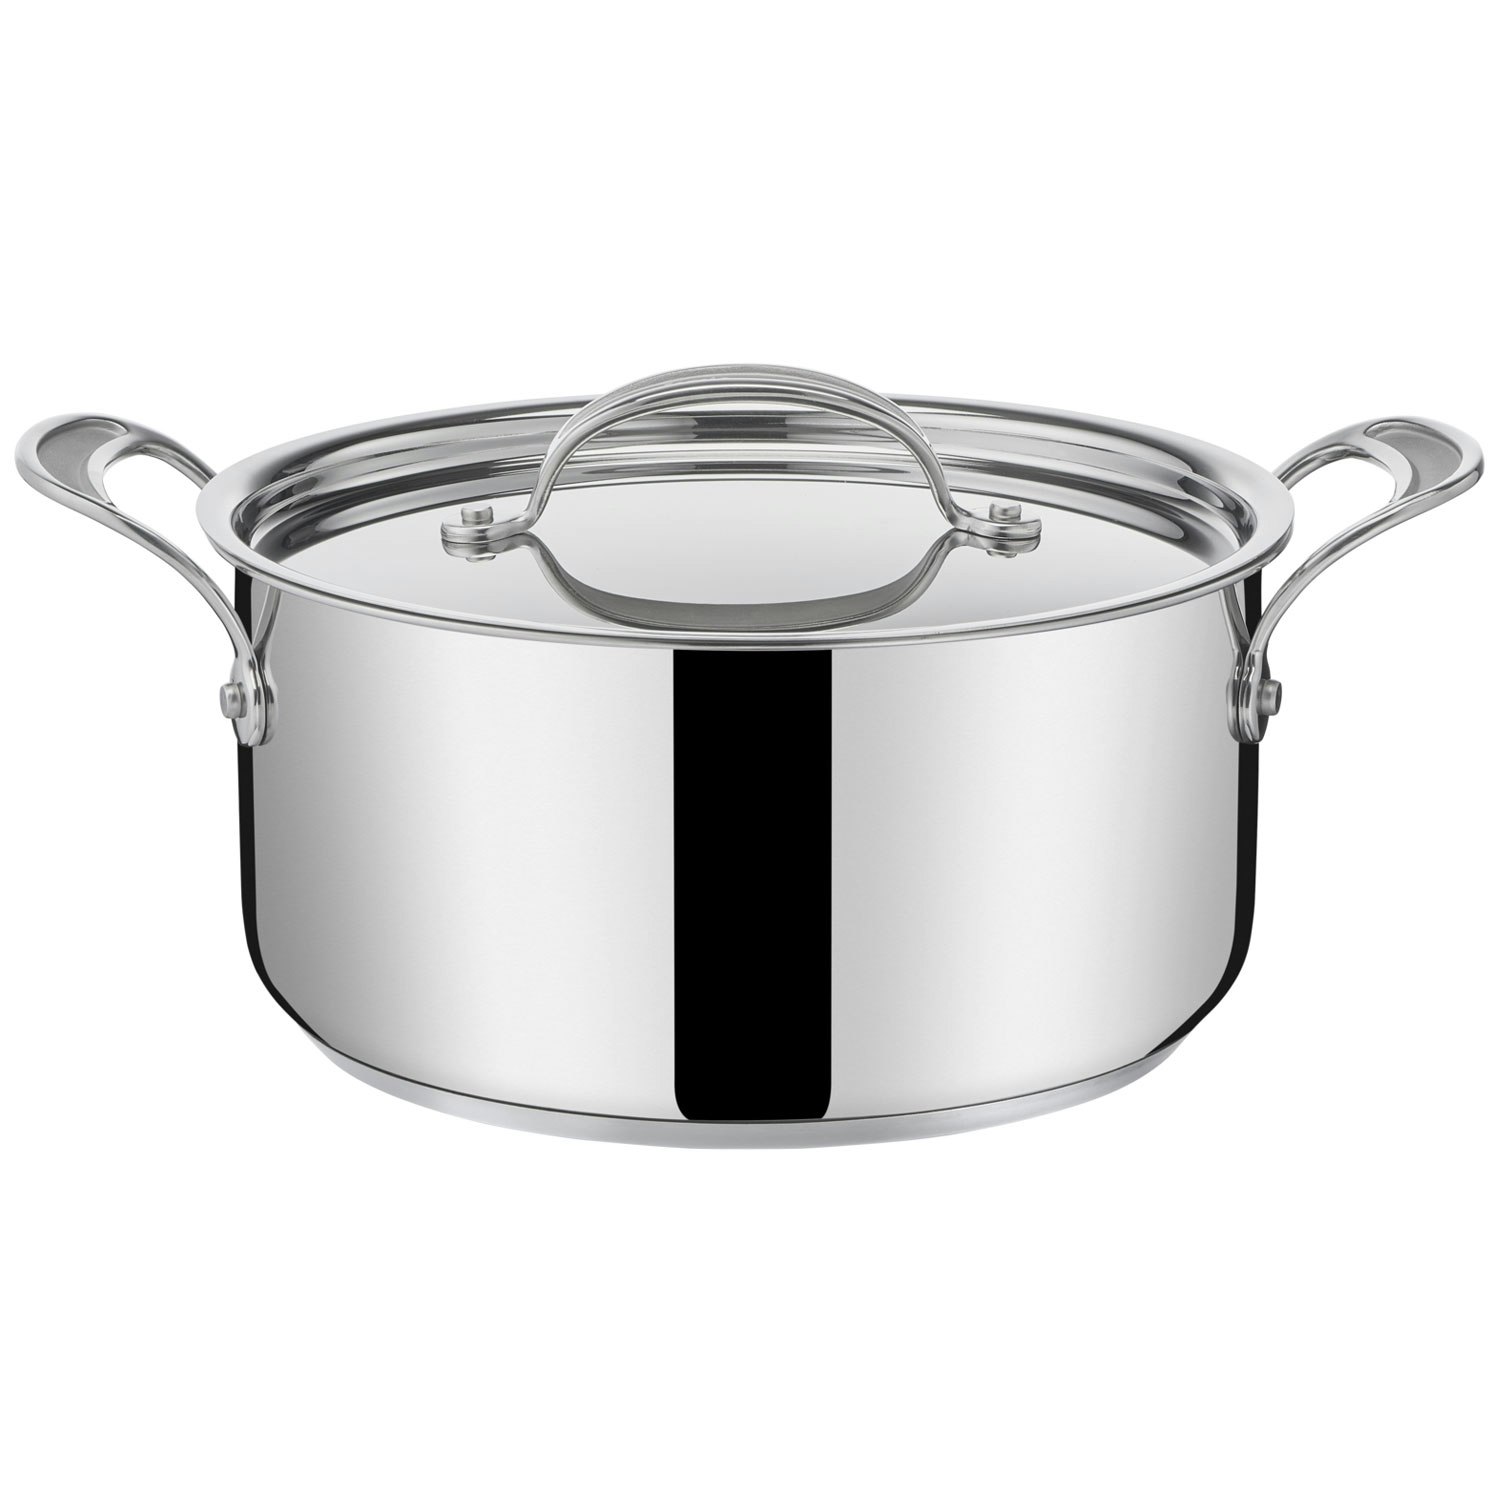 Tefal COOKWARE Stewpot, 24cm, Jamie Oliver, Stainless Steel